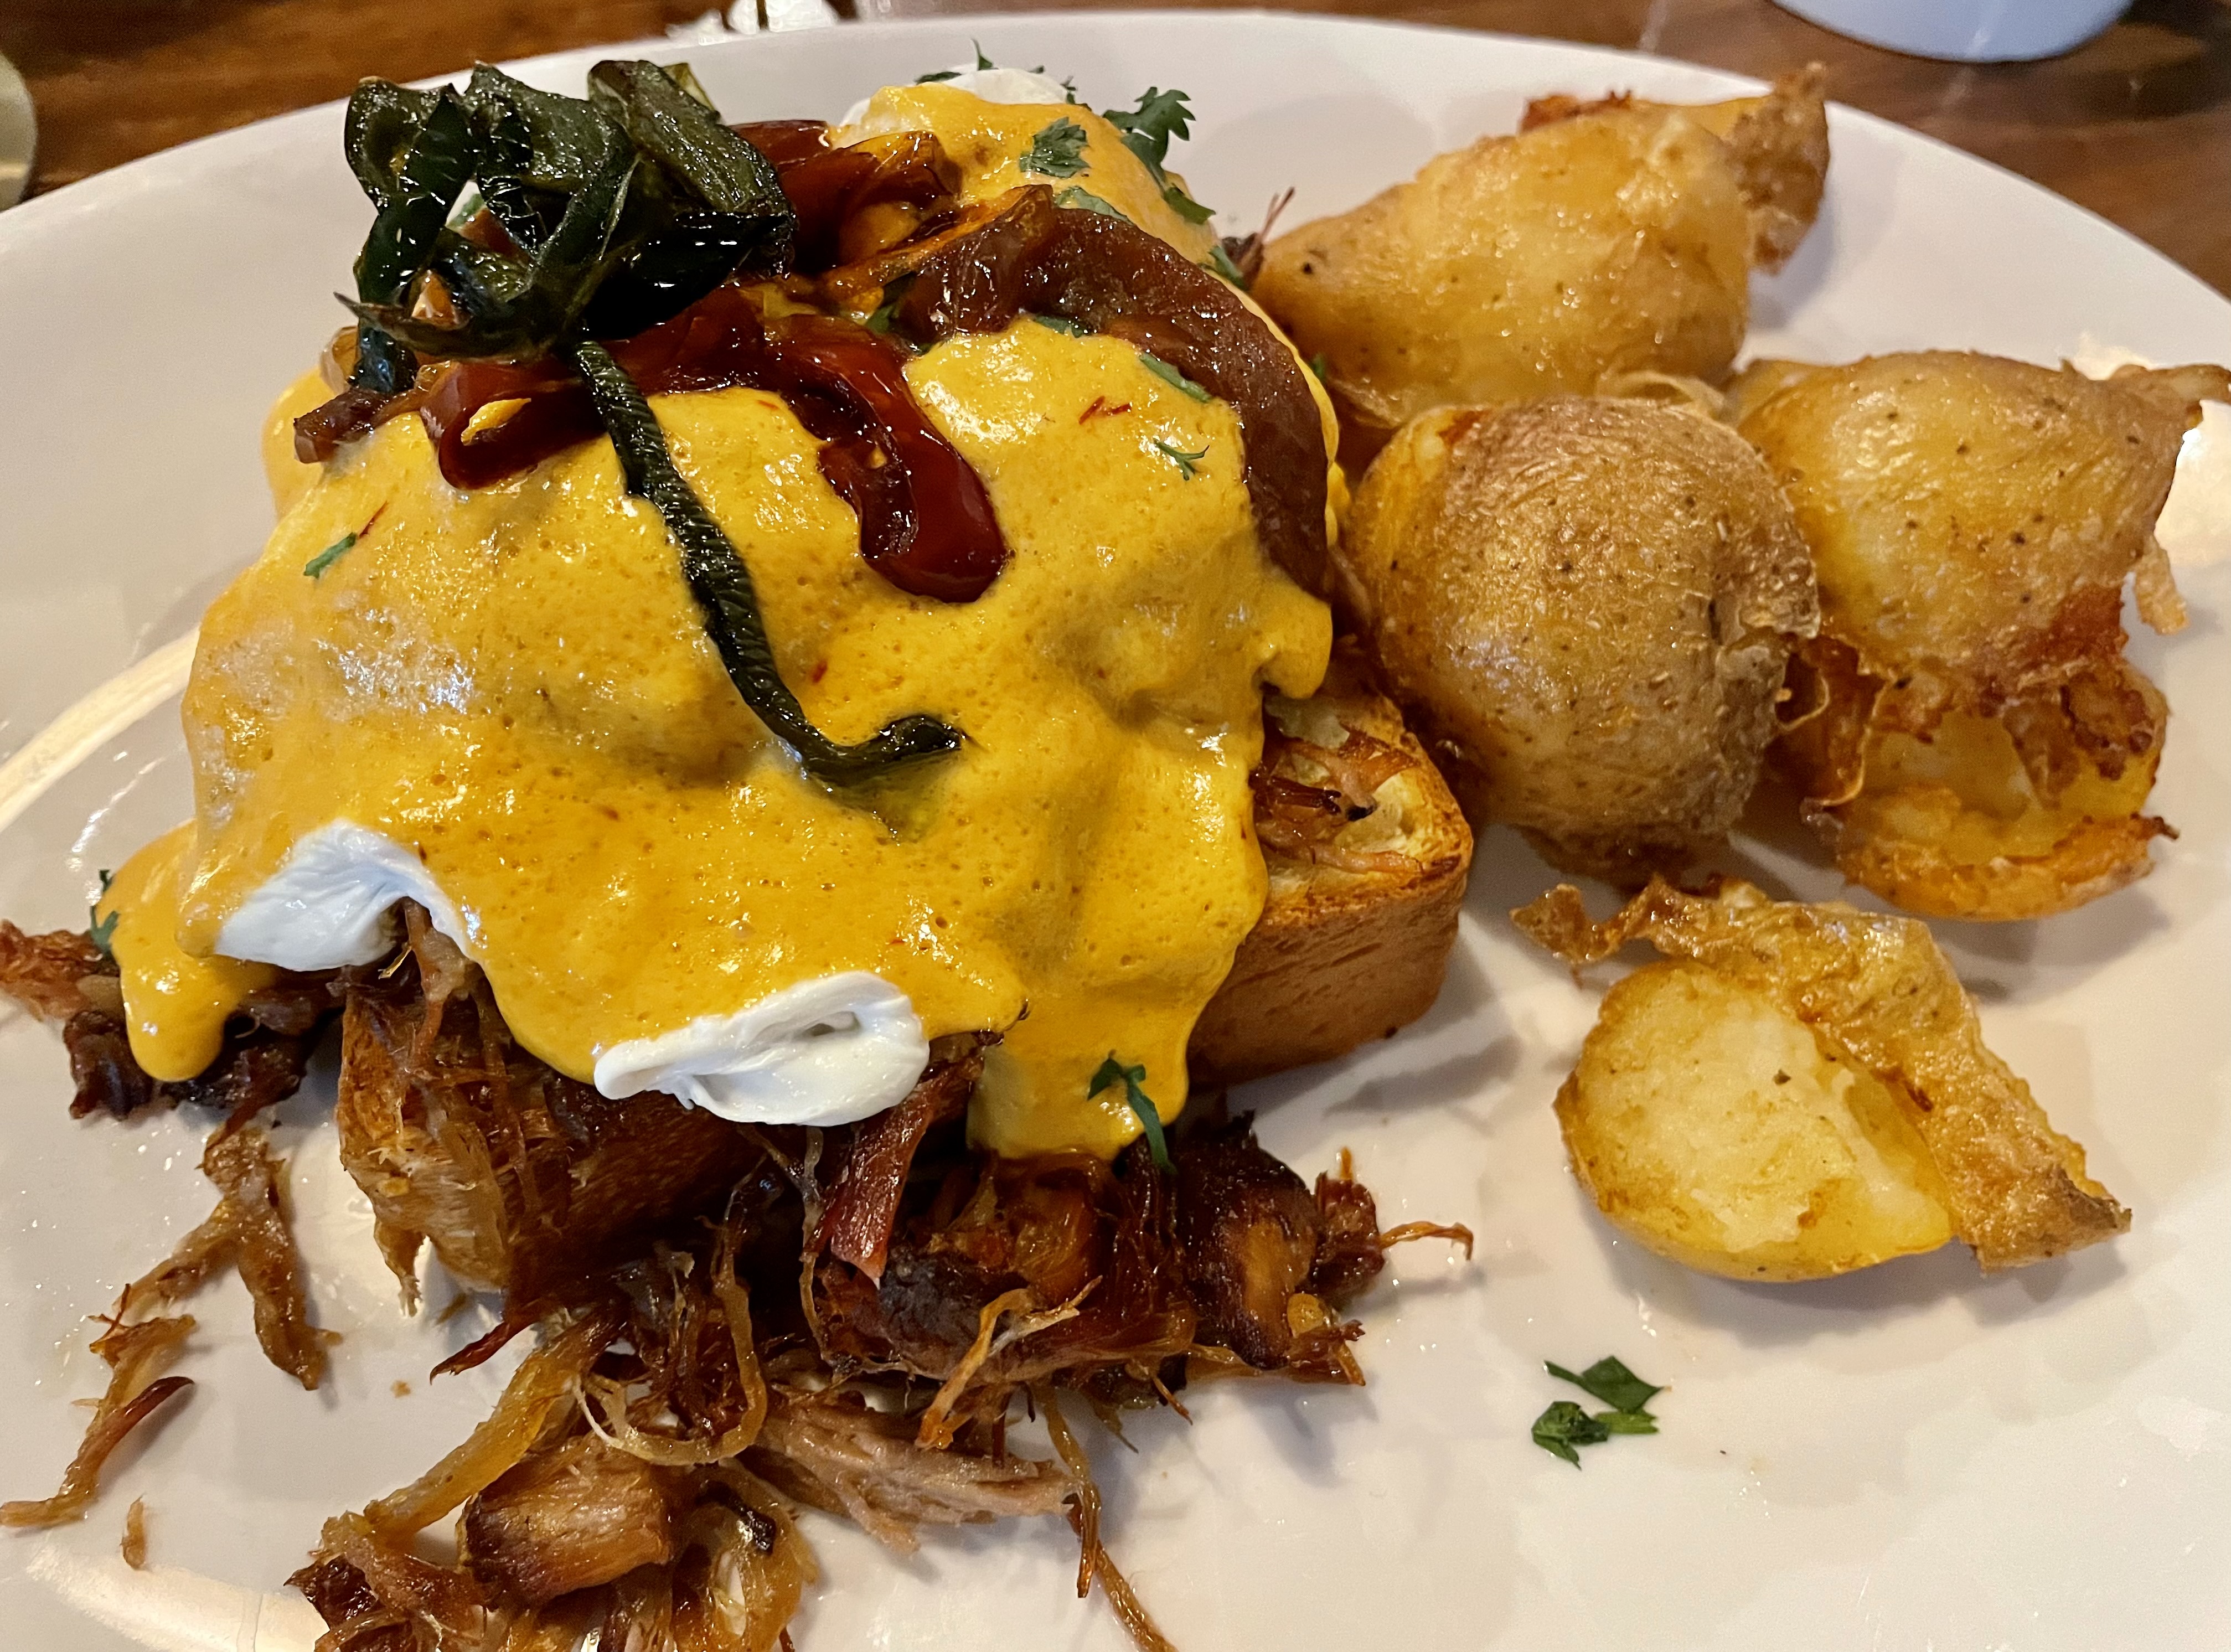 Tucson food. Carnitas Benedict. gs on top of orange and cinnamon braised pork, smothered in chipotle hollandaise, with potatoes on the side.